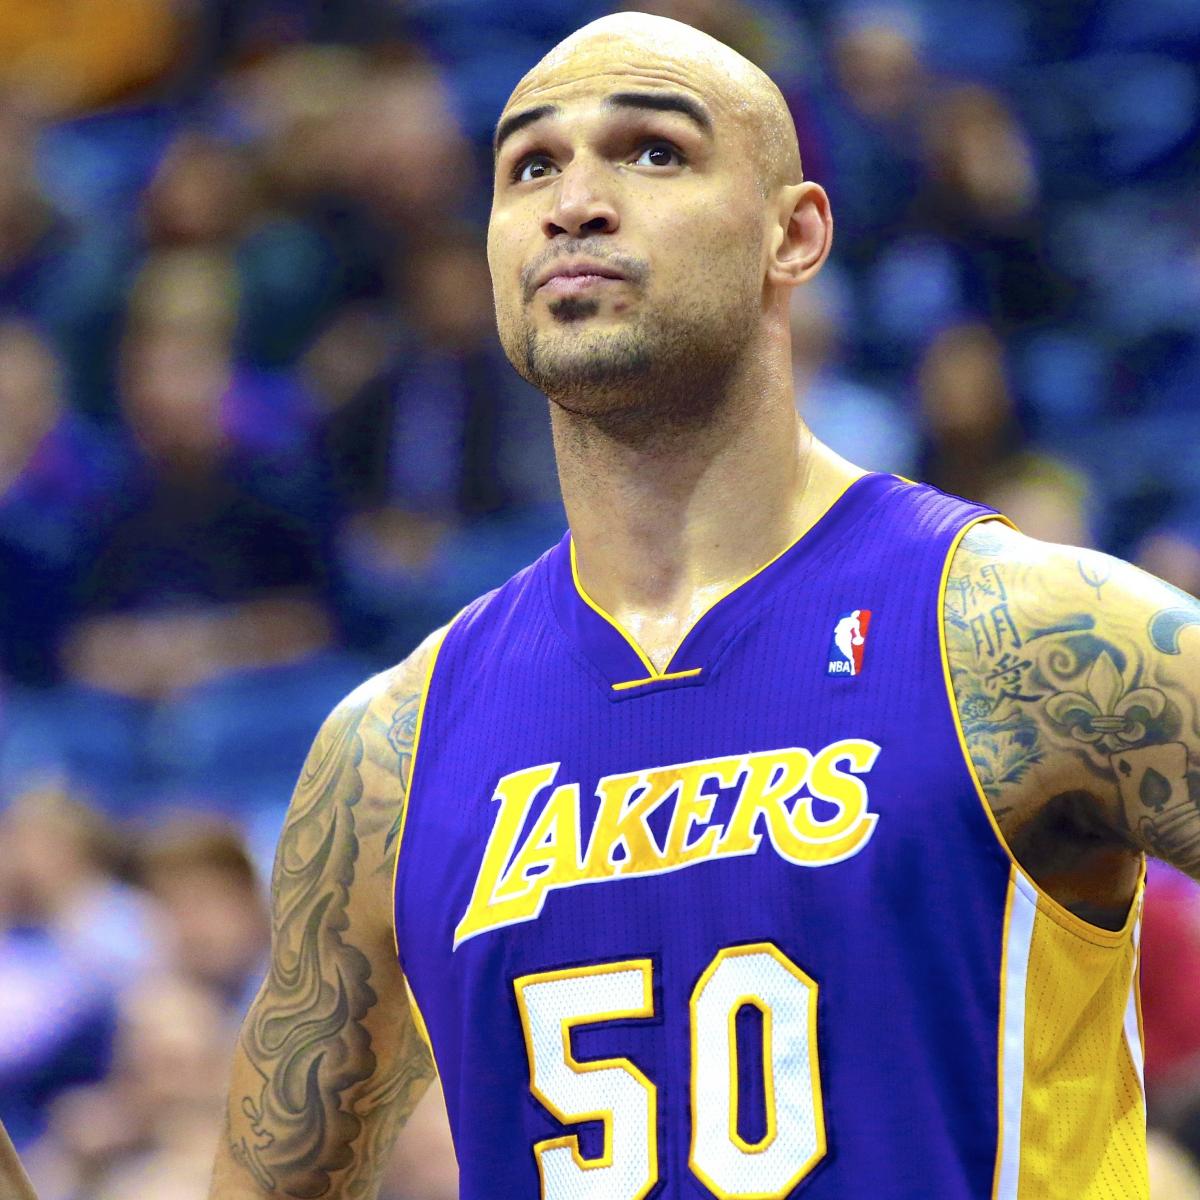 Pelicans center Robert Sacre not shy about showing his love for